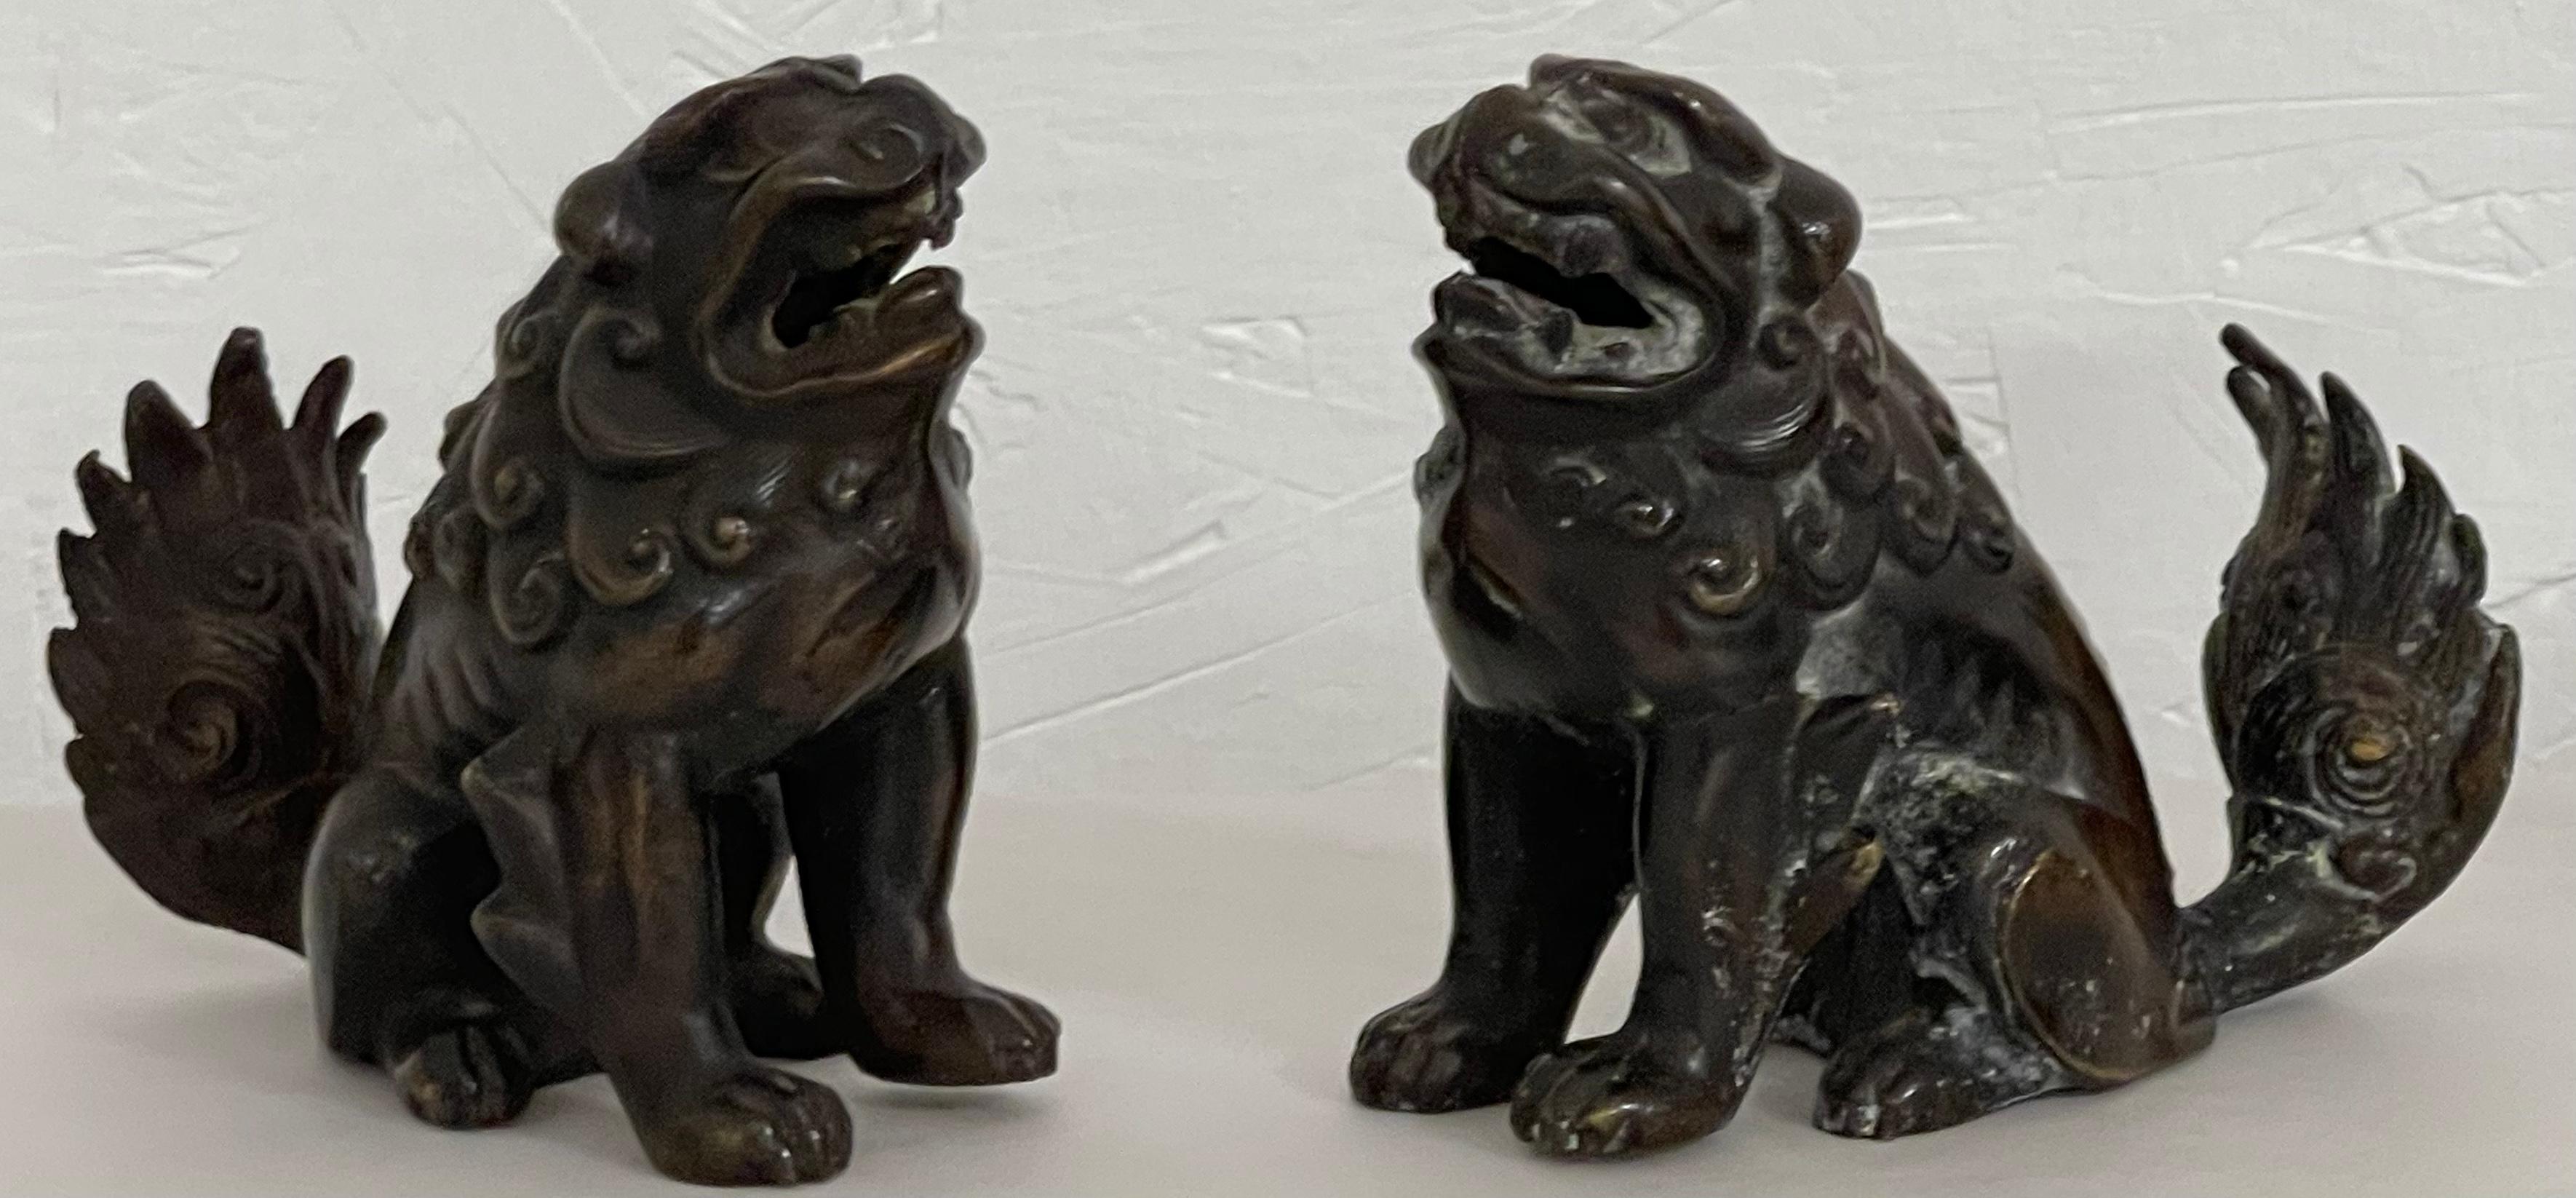 Early 20th-C. Asian Bronze Food Dogs or Lions Figurines, Pair In Good Condition For Sale In Kennesaw, GA